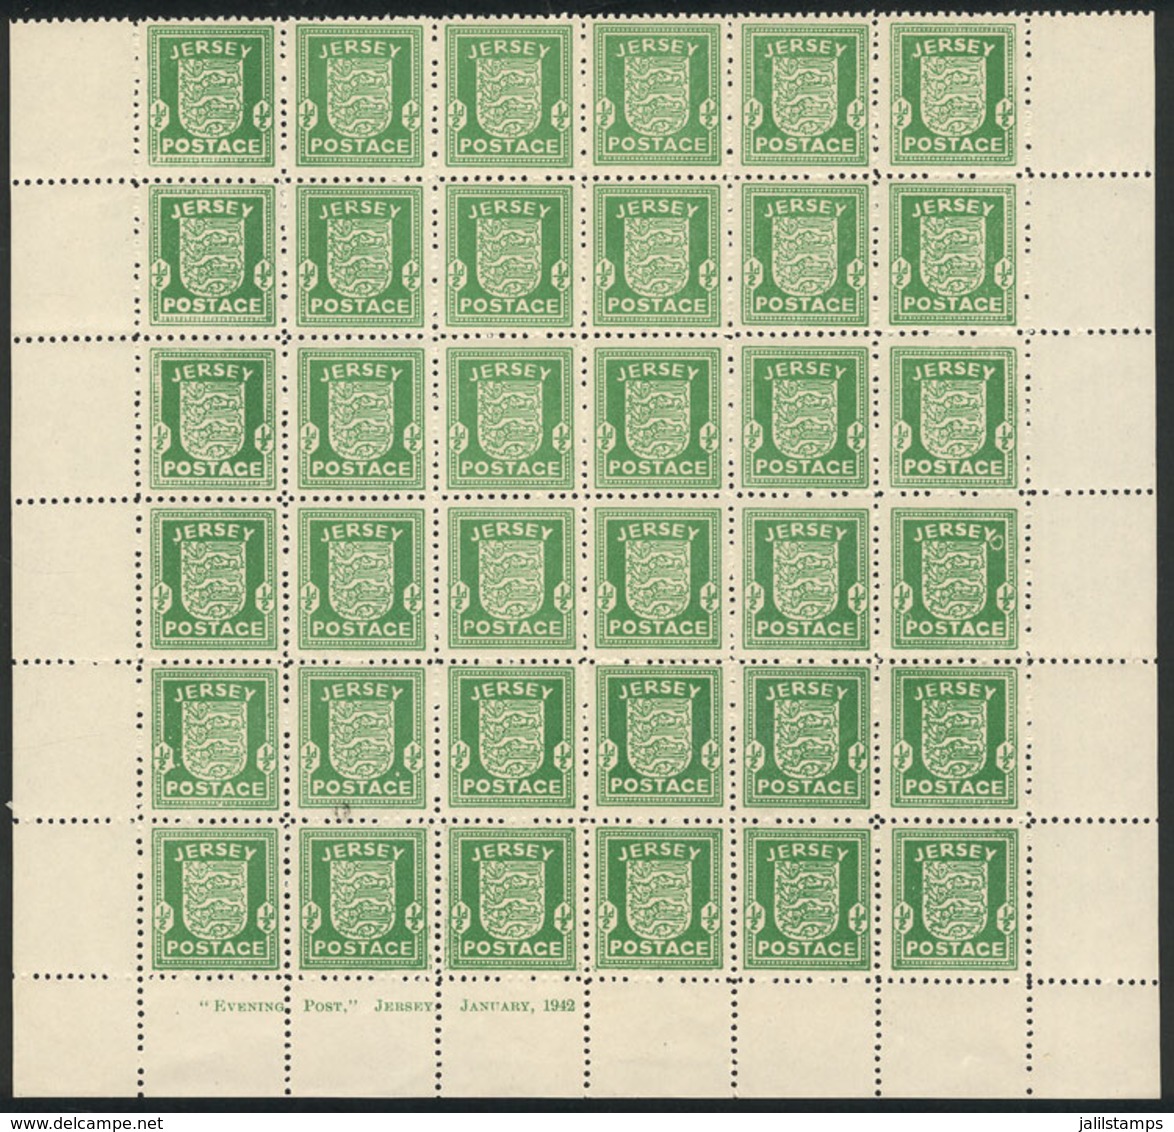 840 GREAT BRITAIN - JERSET: Yvert 1a, 1941 ½p. Green On Gray Paper, MNH Block Of 36, - Sin Clasificación